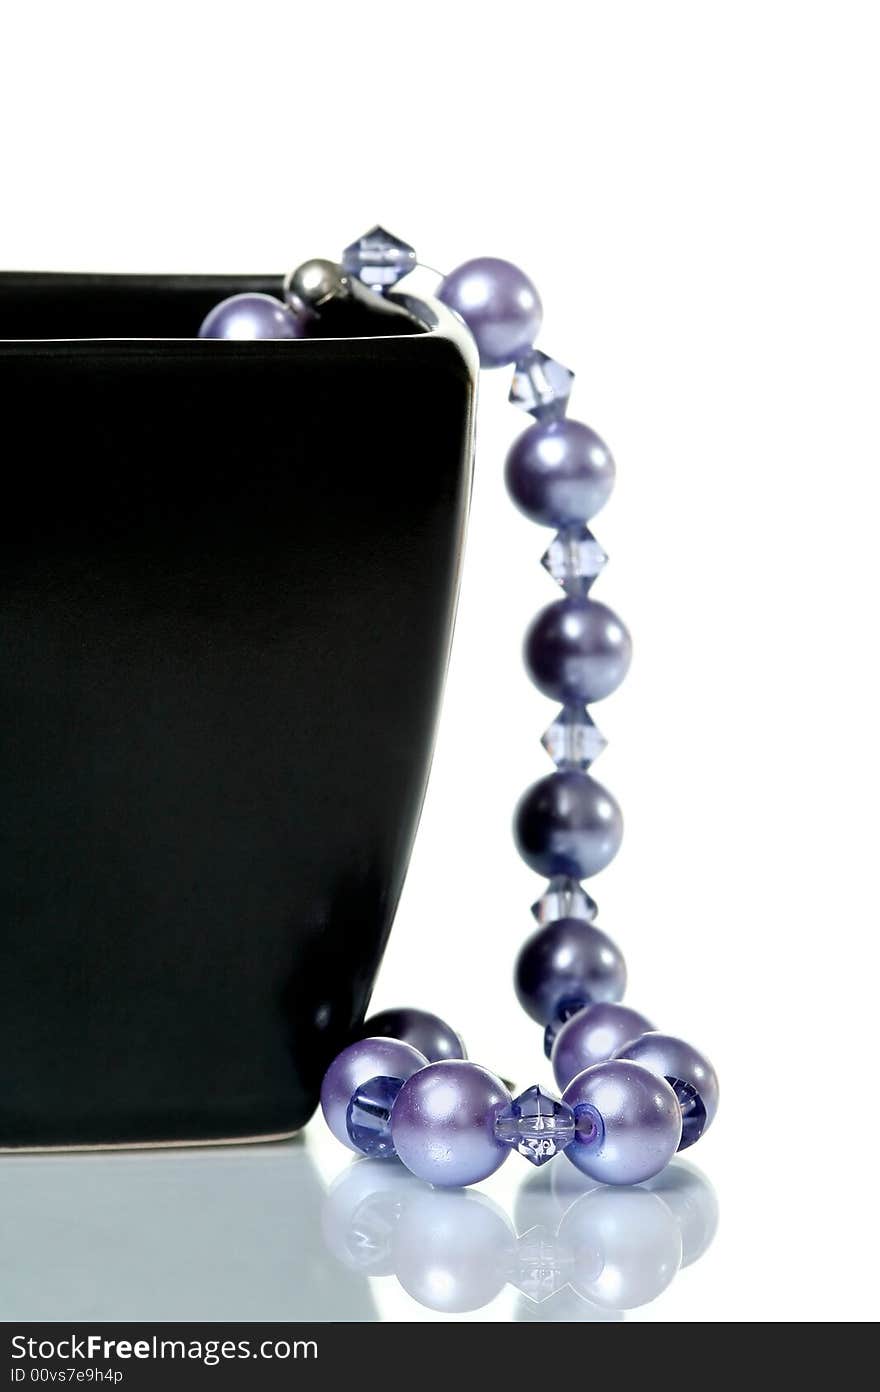 Purple necklace hanging from black glass bowl on white background. Purple necklace hanging from black glass bowl on white background